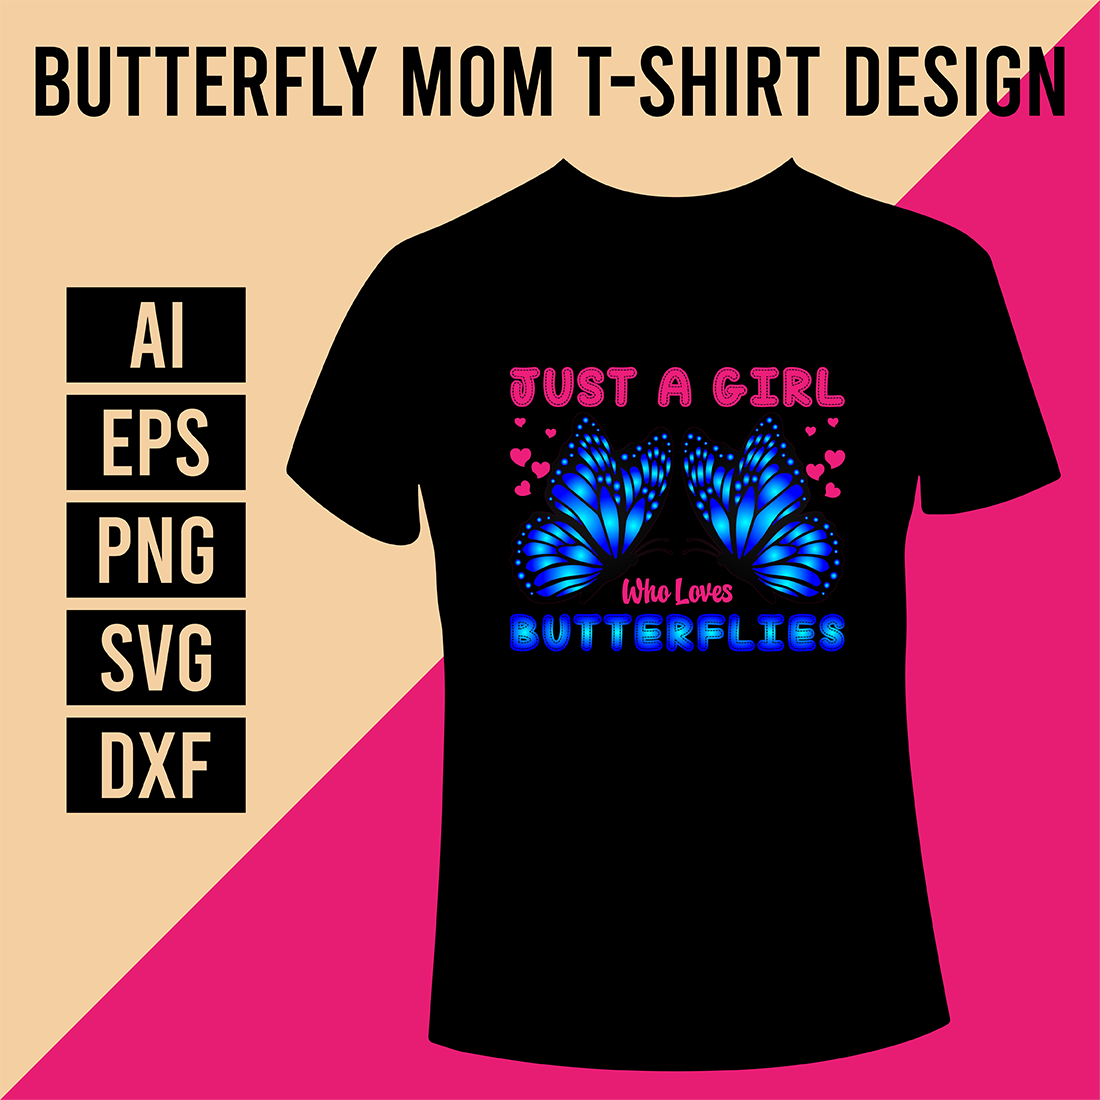 Butterfly Mom T-Shirt Design cover image.